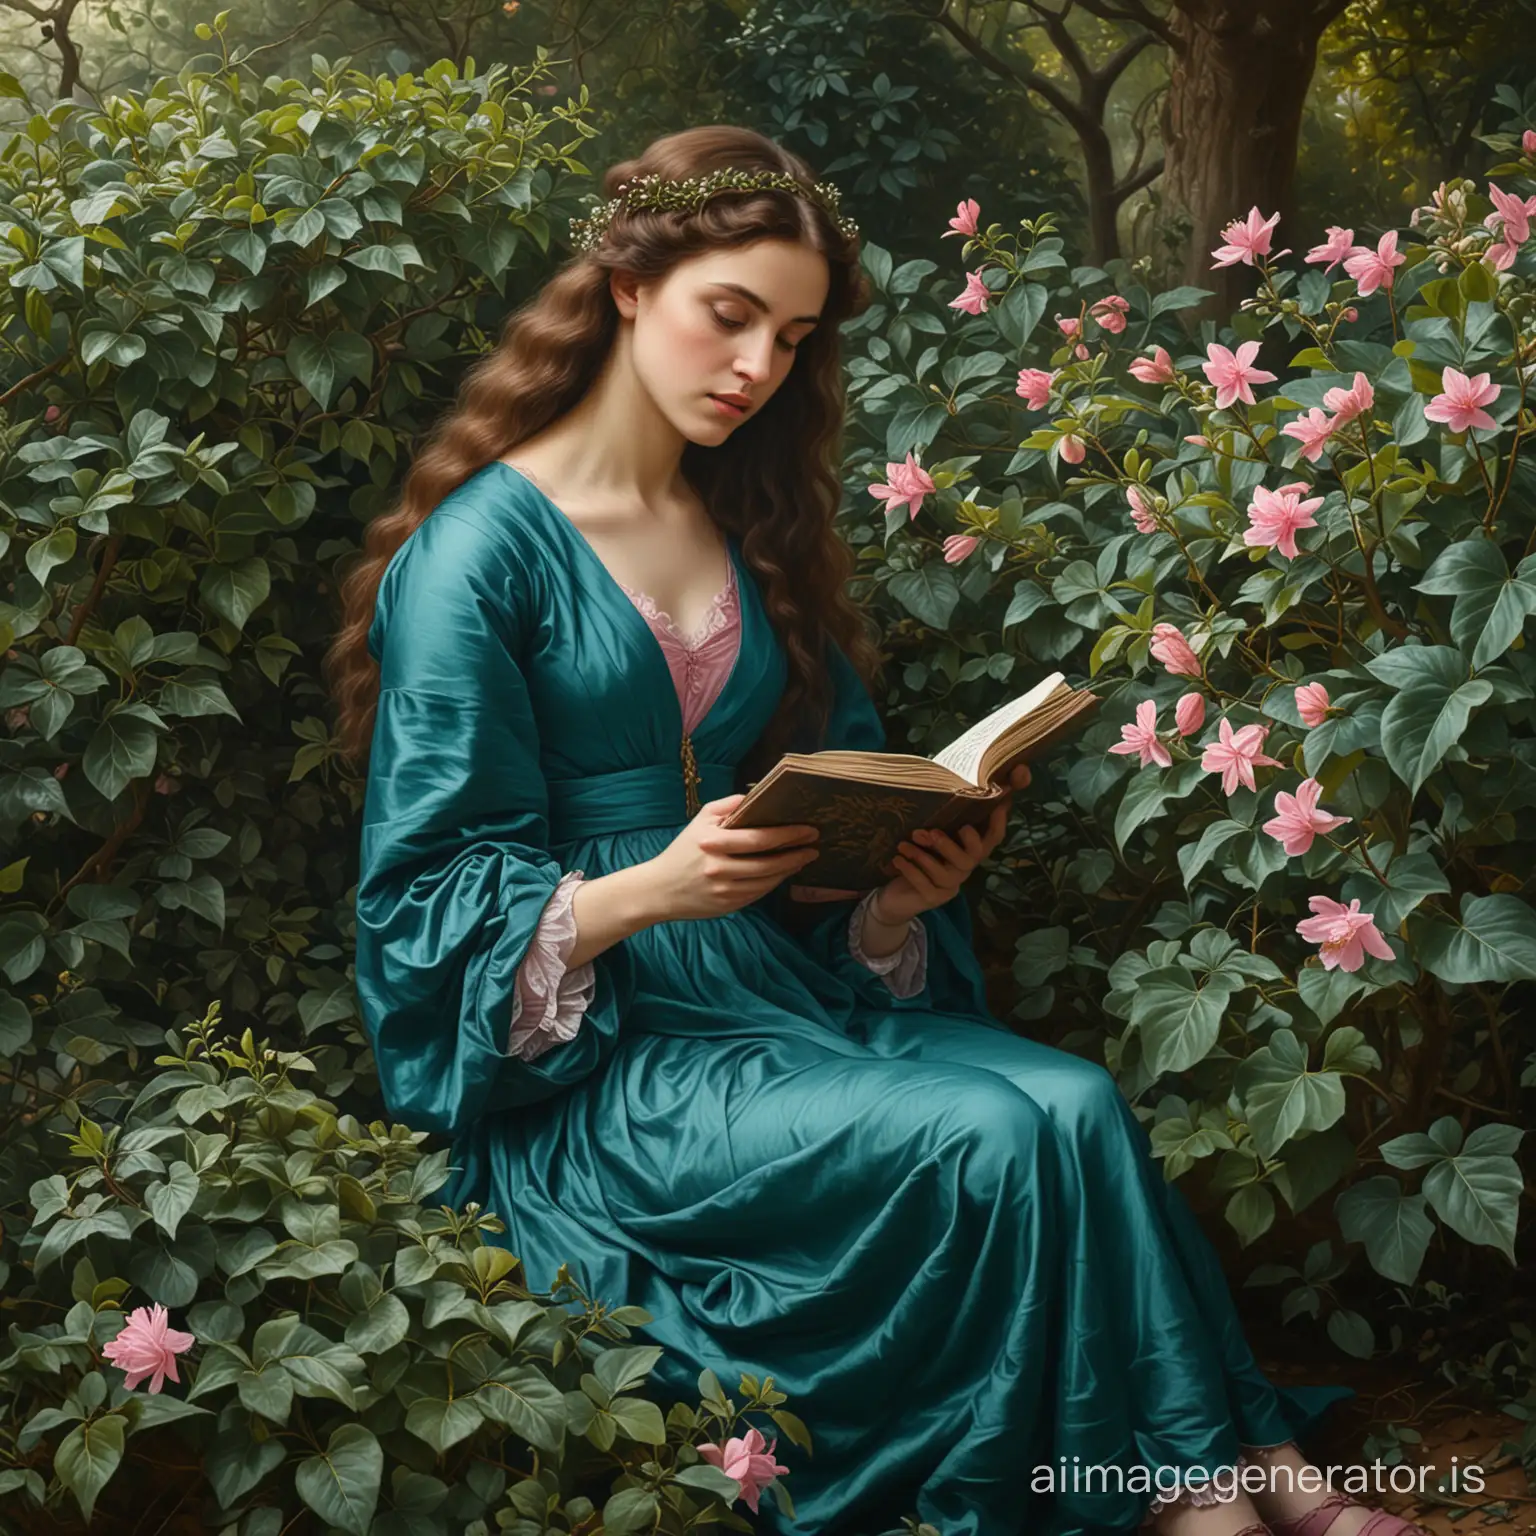 PreRaphaelite-Art-DarkHaired-Woman-Amid-Hedera-Bushes-with-Pink-Flower-and-Book